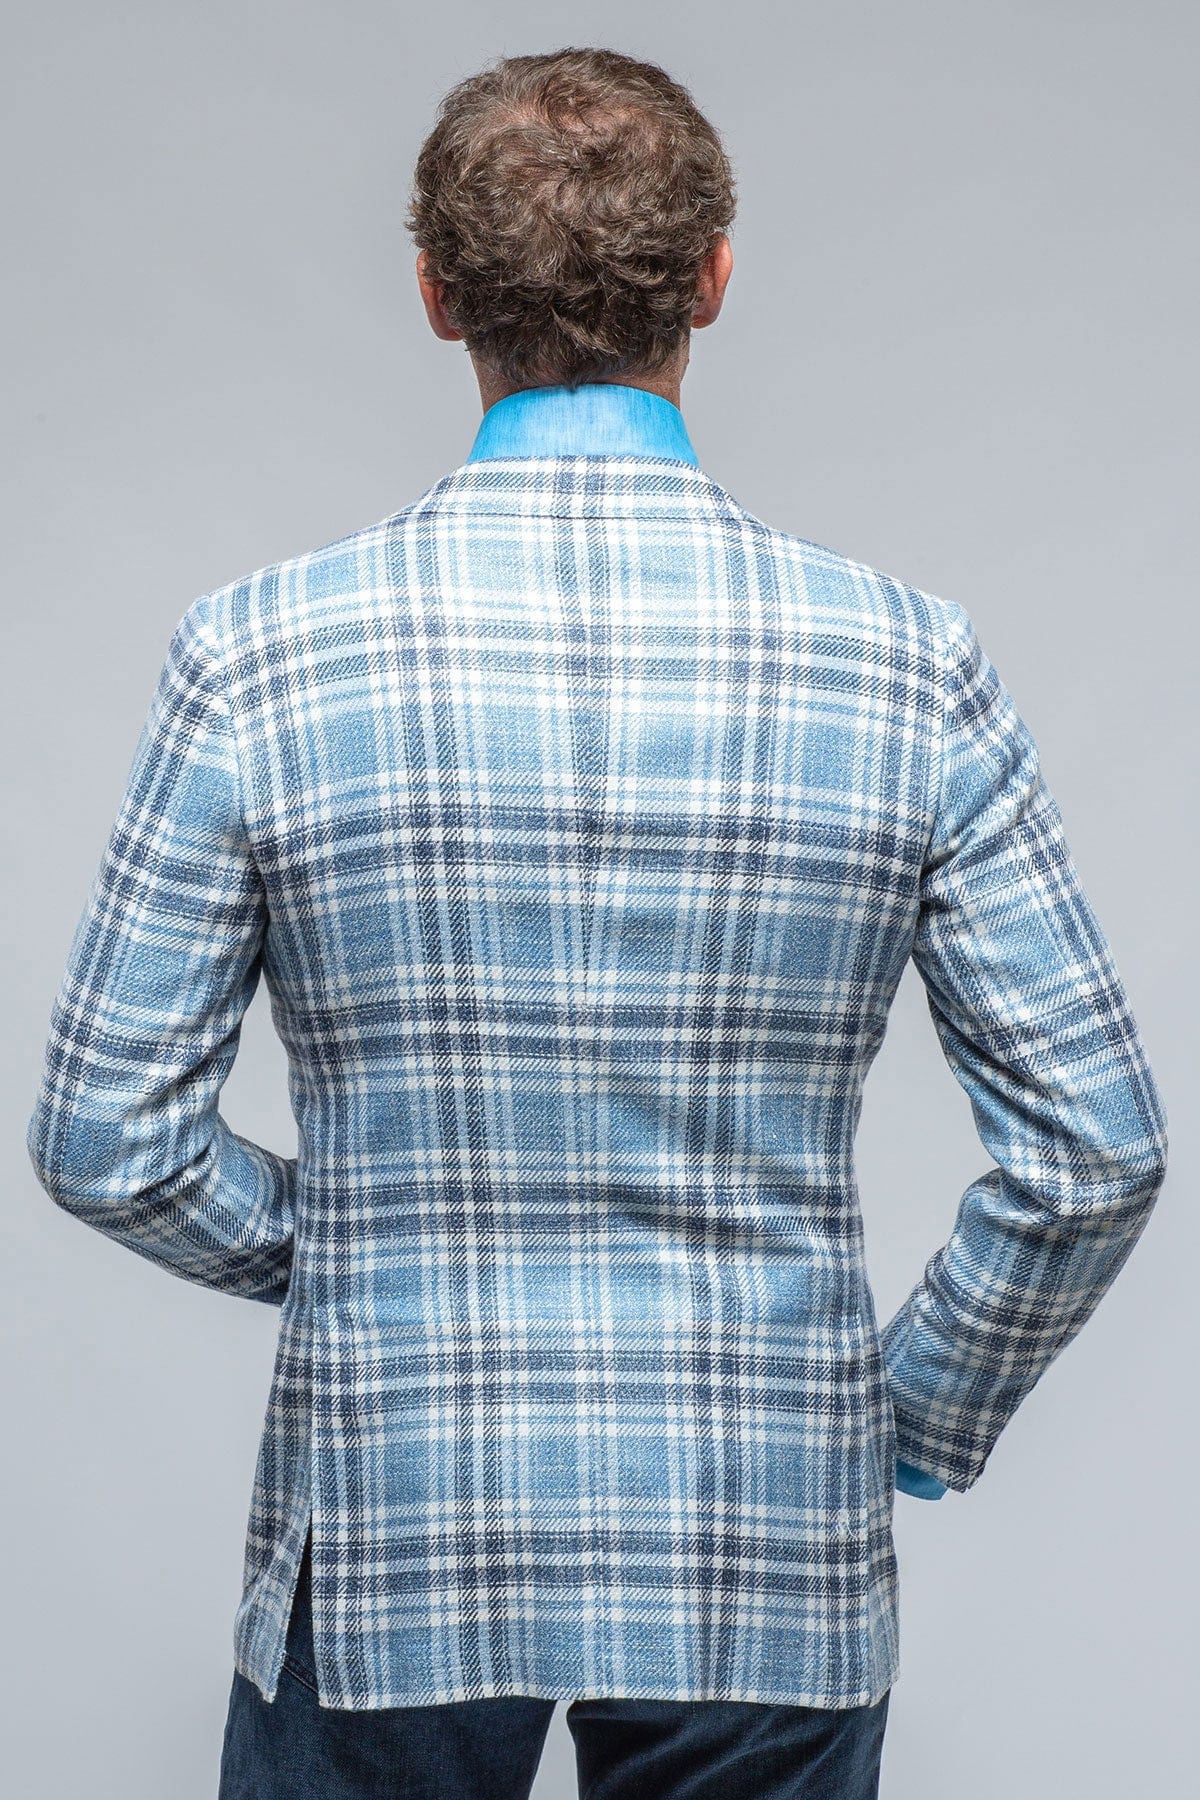 YOUNG CLUB CLASSIC Full Sleeve Checkered Men Jacket - Buy YOUNG CLUB  CLASSIC Full Sleeve Checkered Men Jacket Online at Best Prices in India |  Flipkart.com